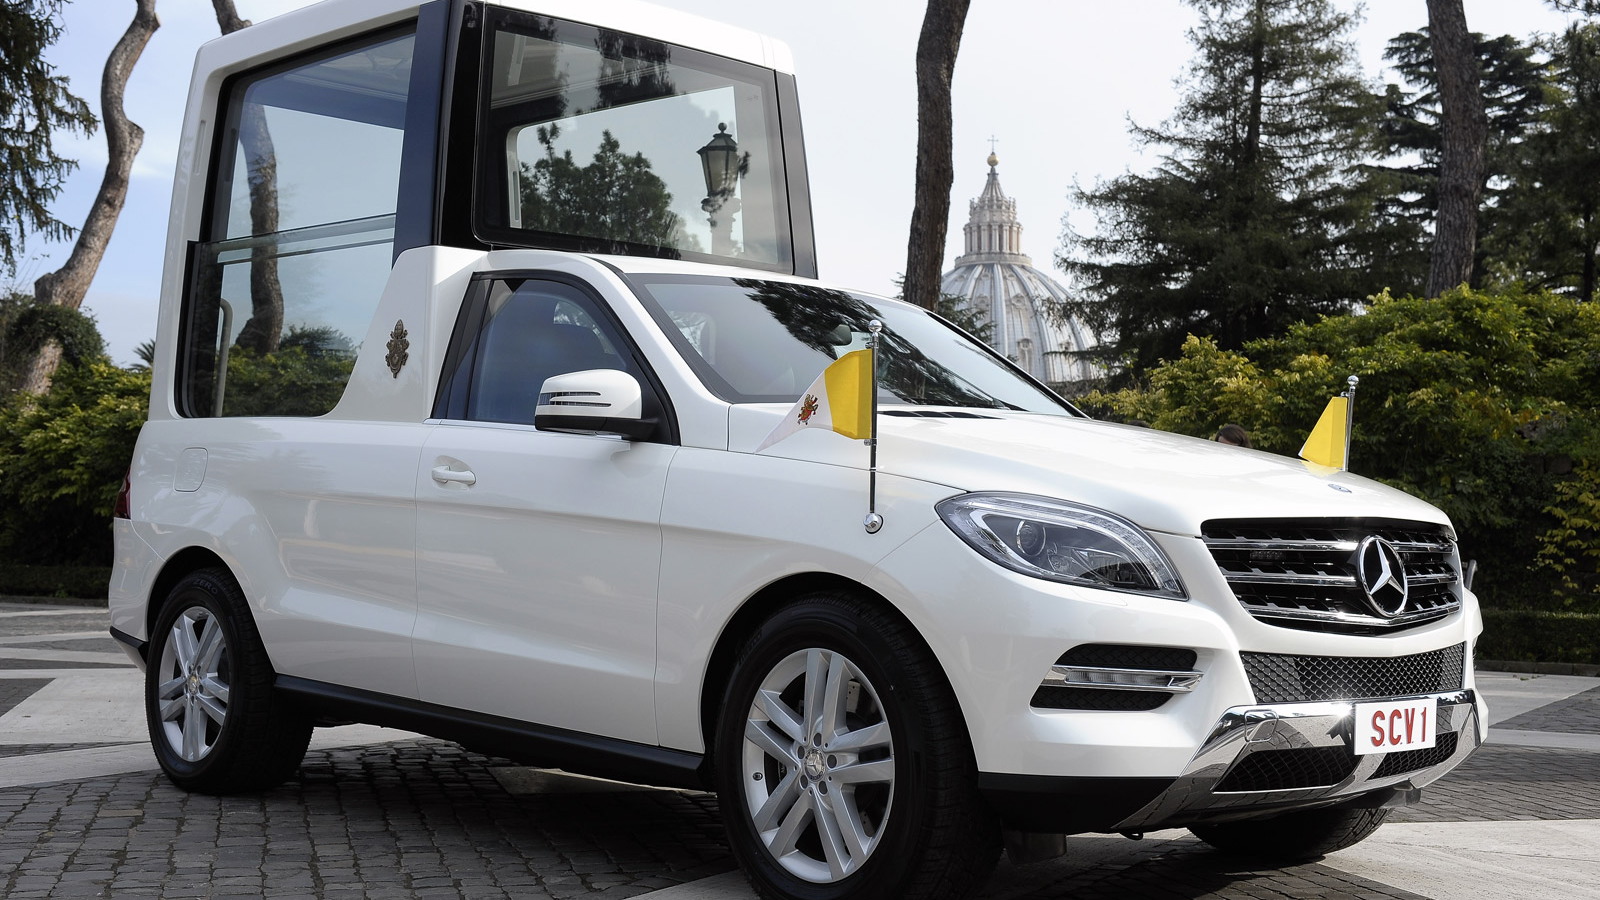 Pope Francis handed the keys to the Popemobile by Daimler CEO Dr. Dieter Zetsche